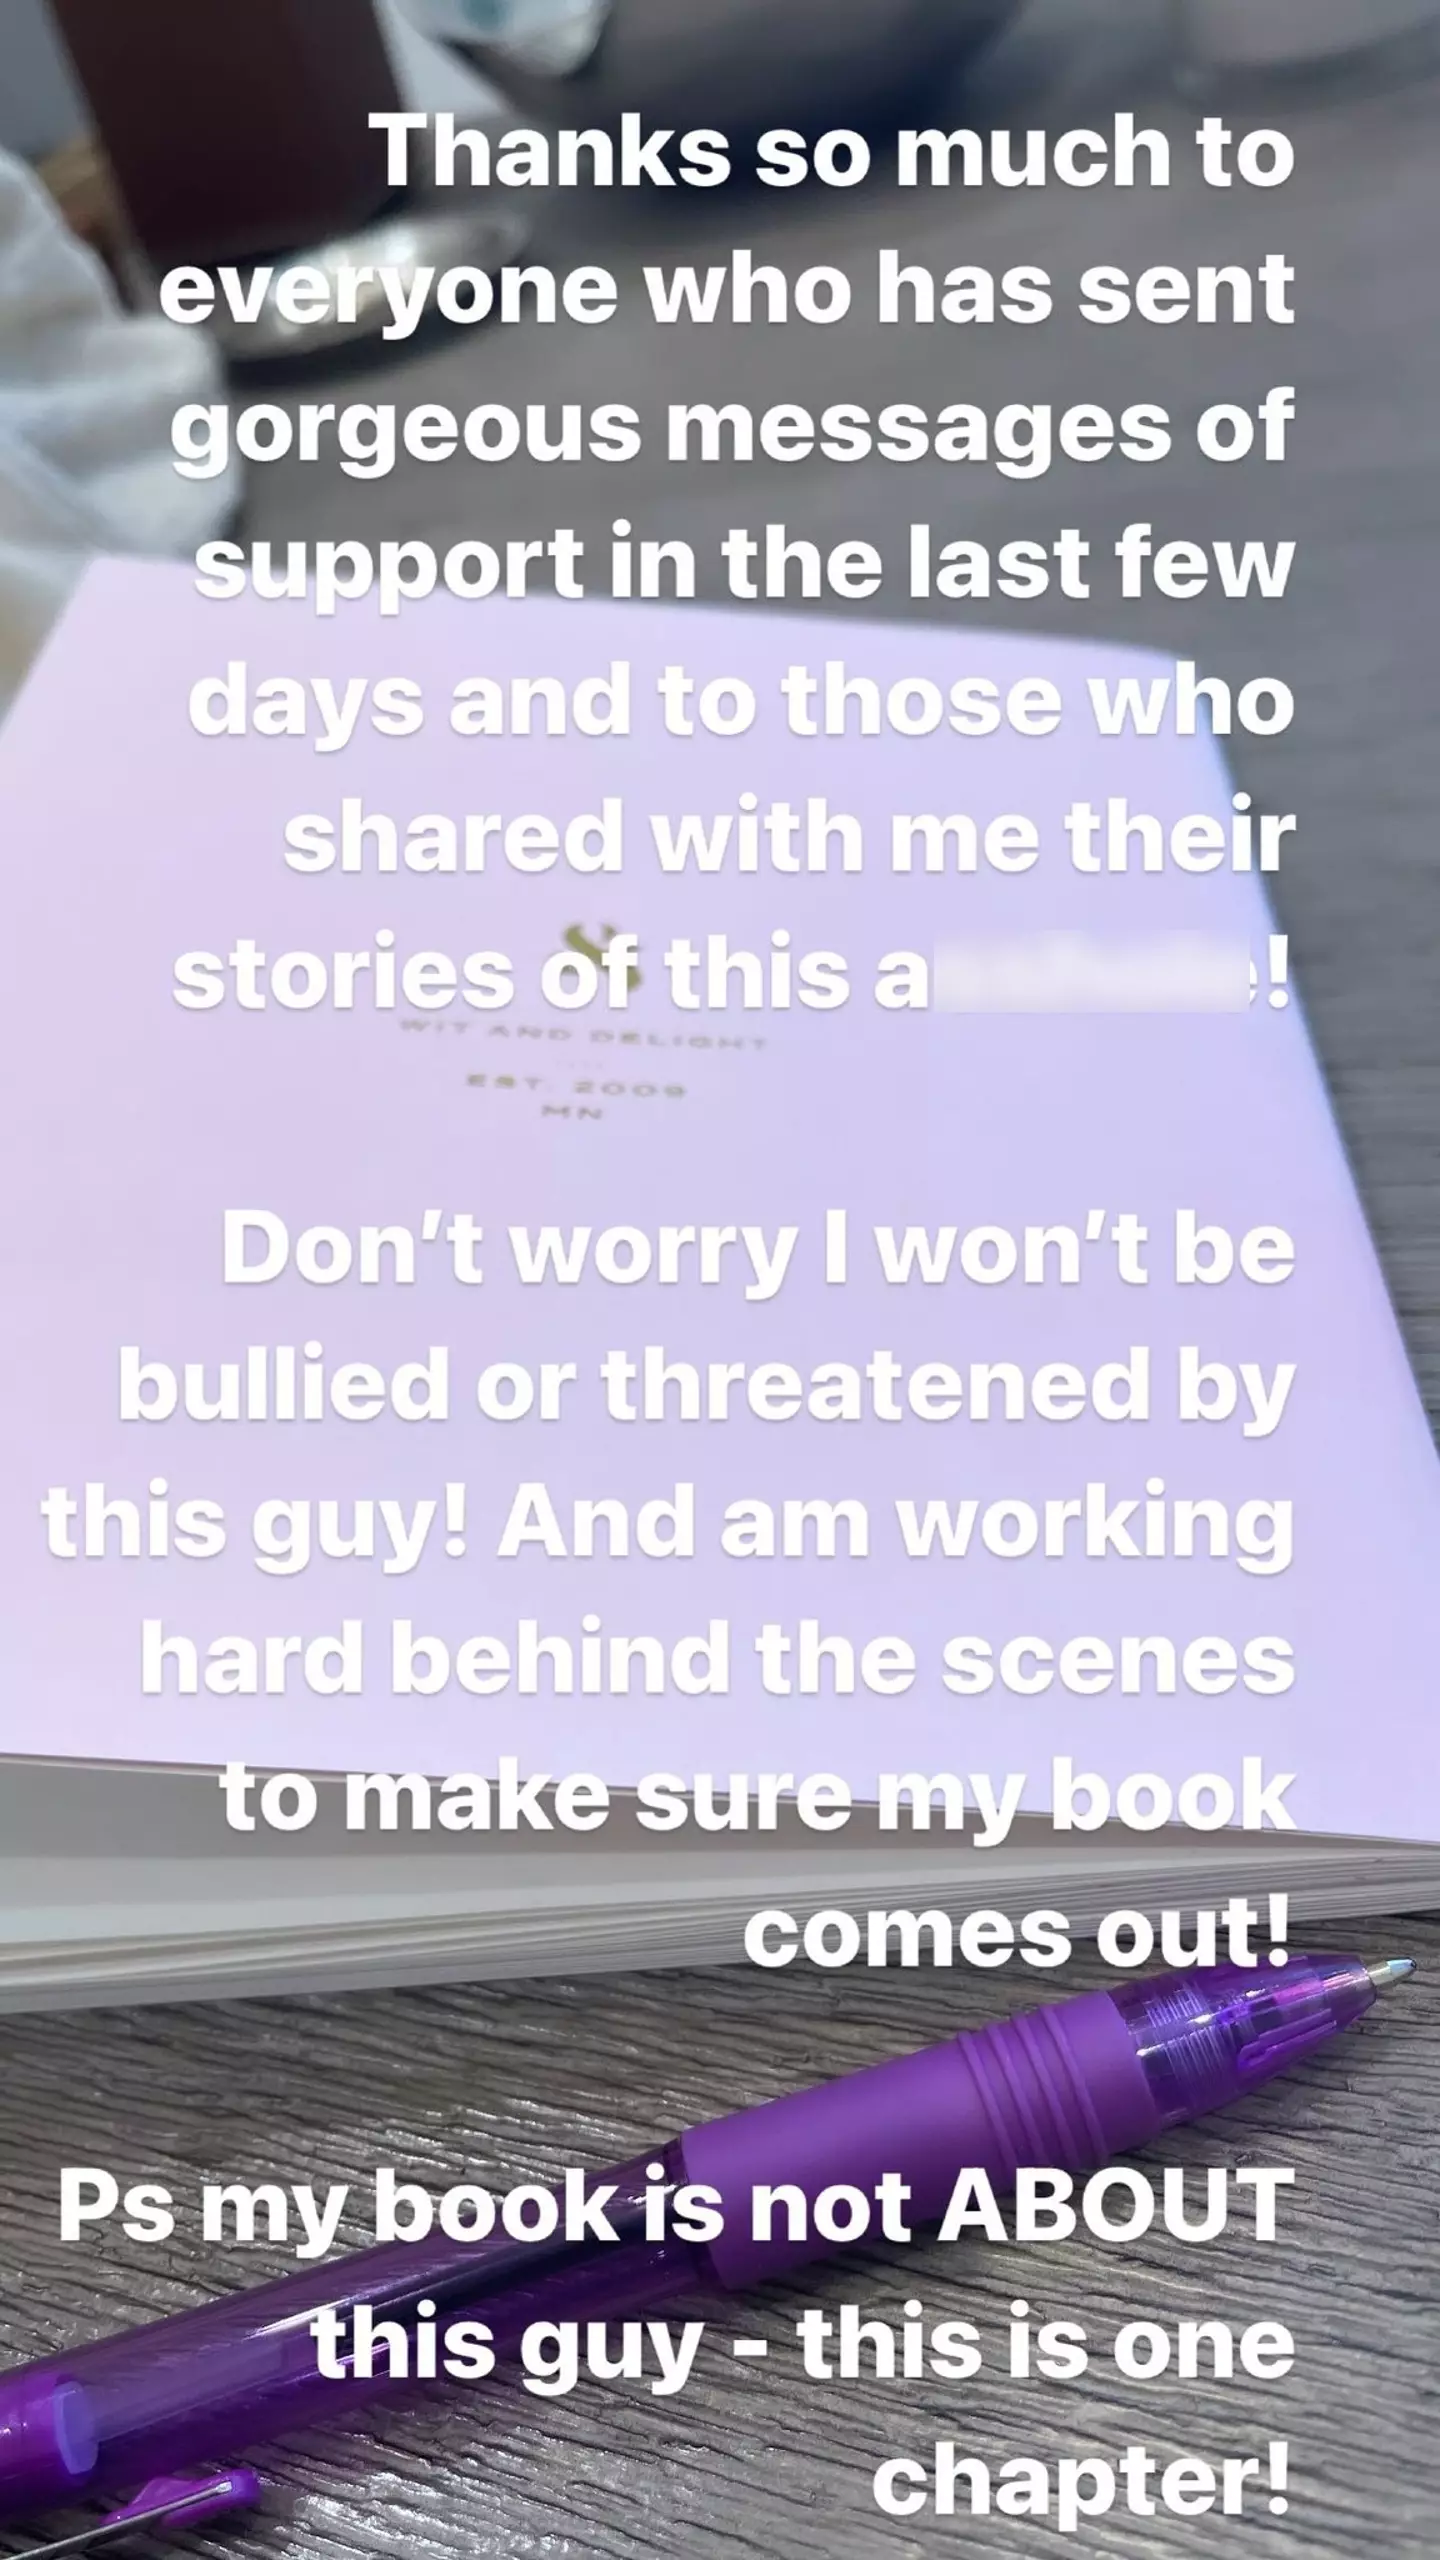 Rebel Wilson took to her Instagram Story to address the matter.